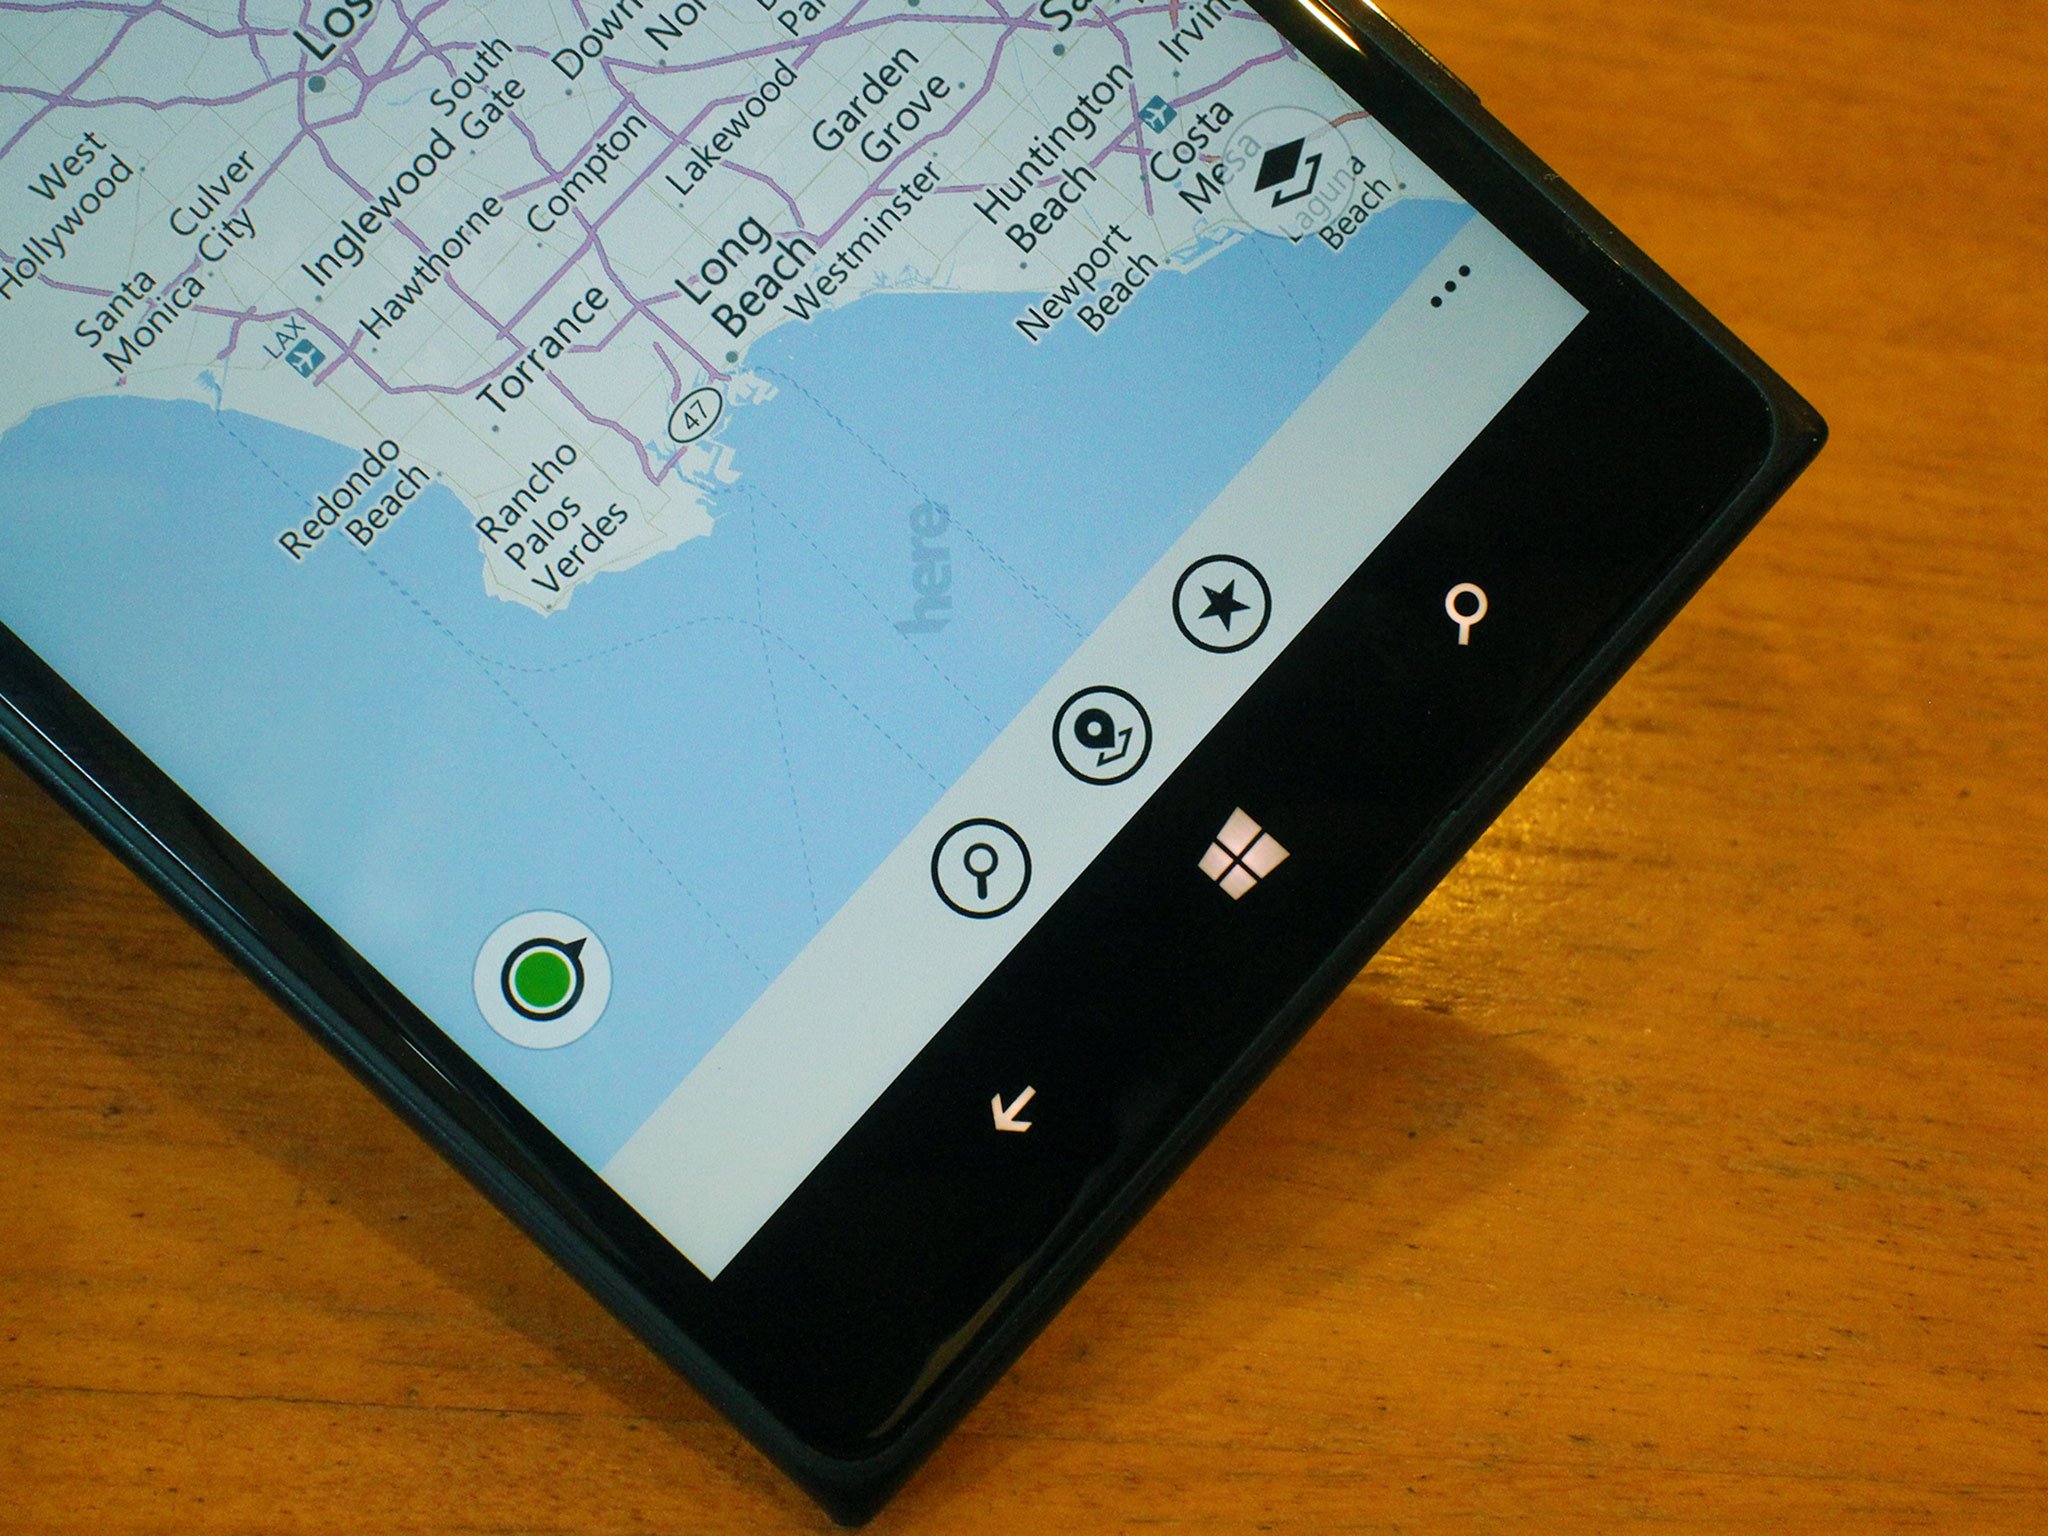 How To Move Offline Map Data To Your Sd Card In Windows Phone